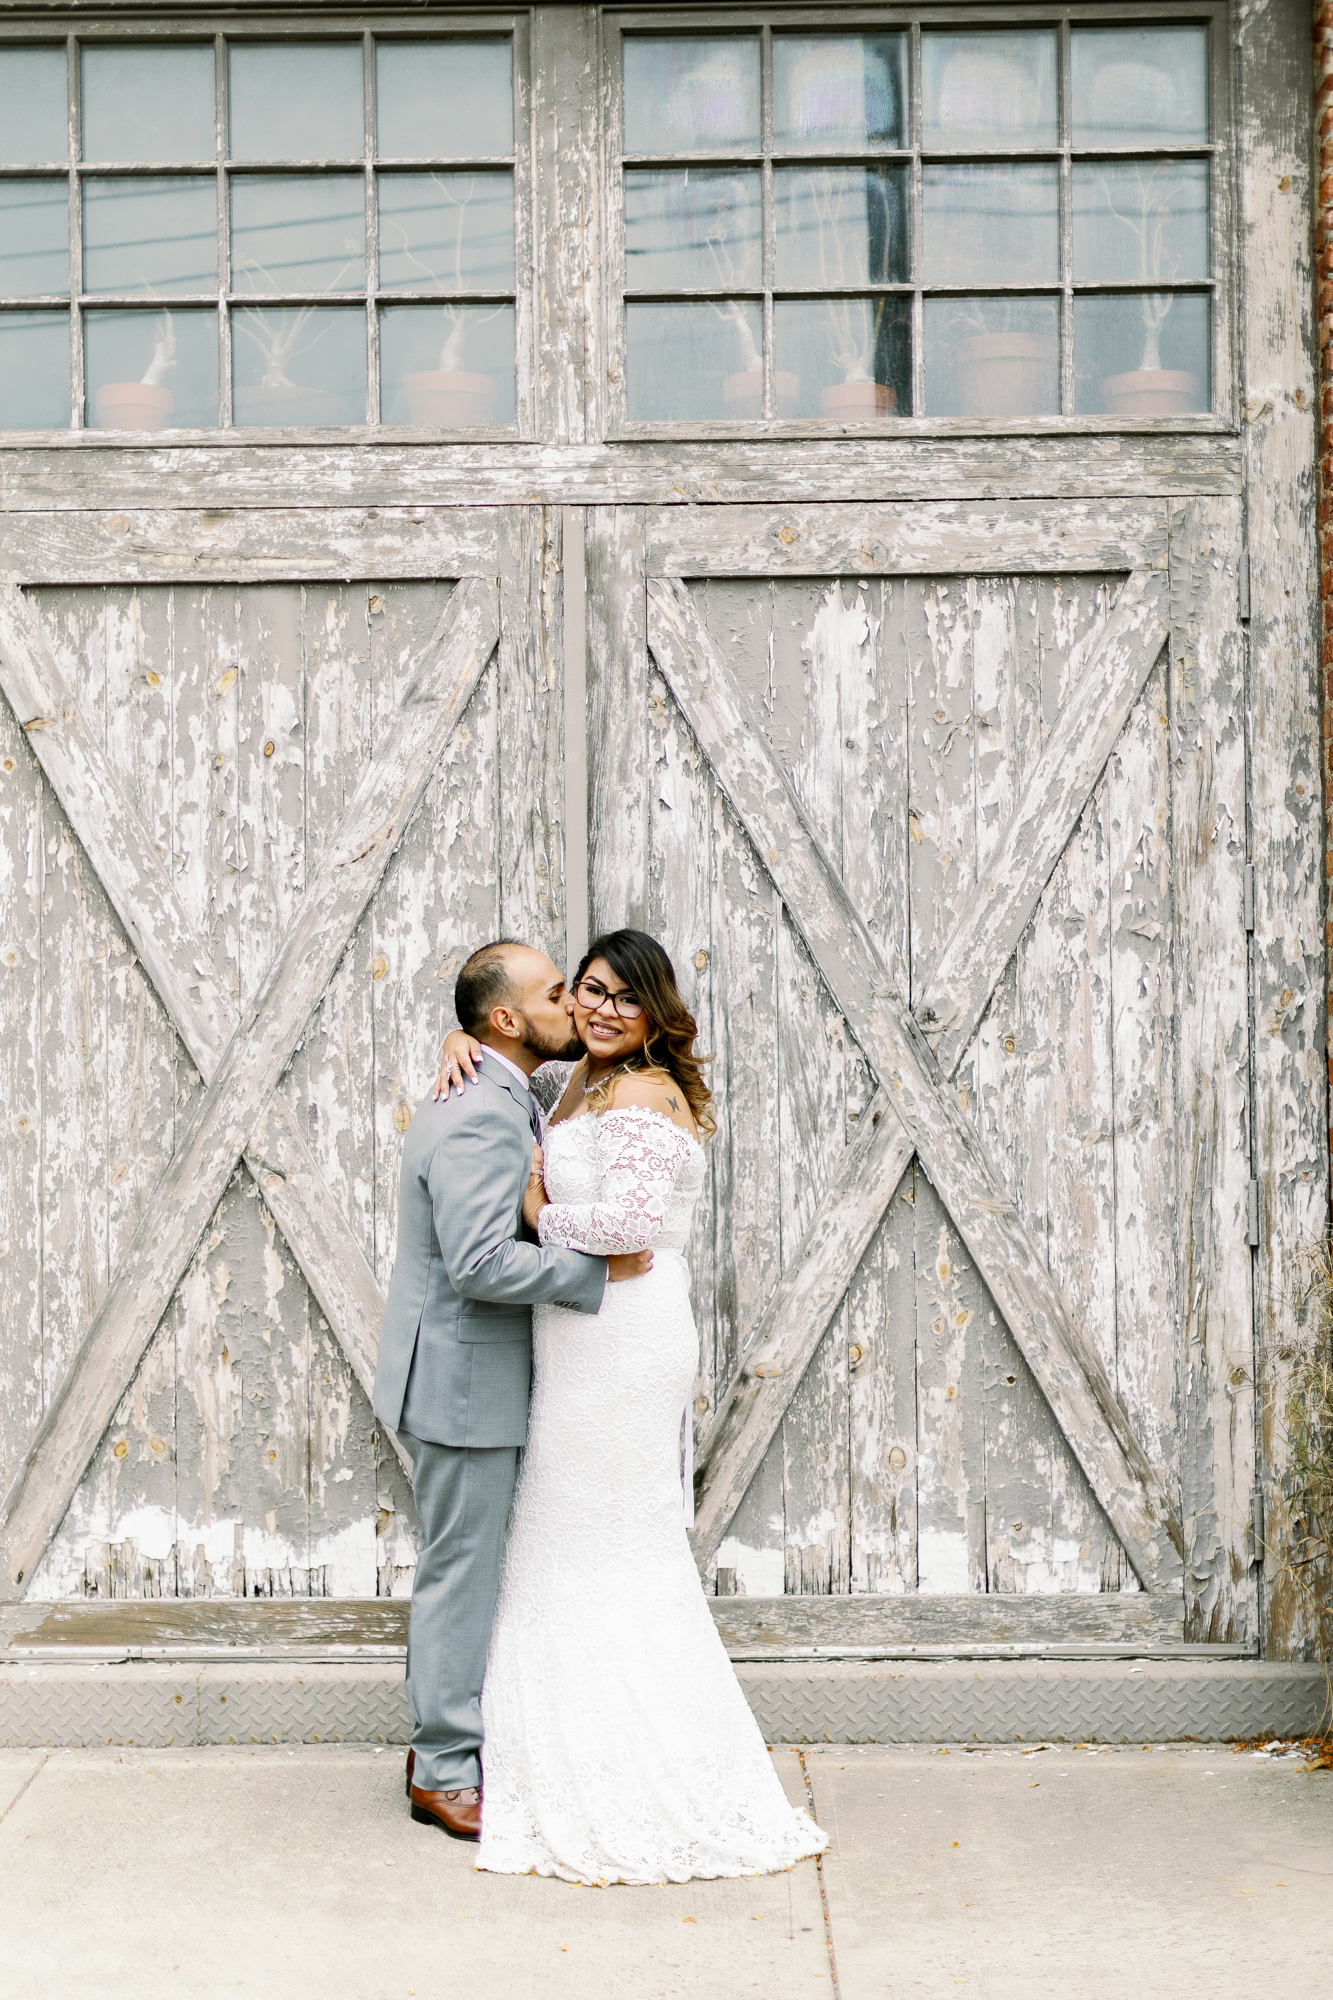 Where to hire a wedding photographer